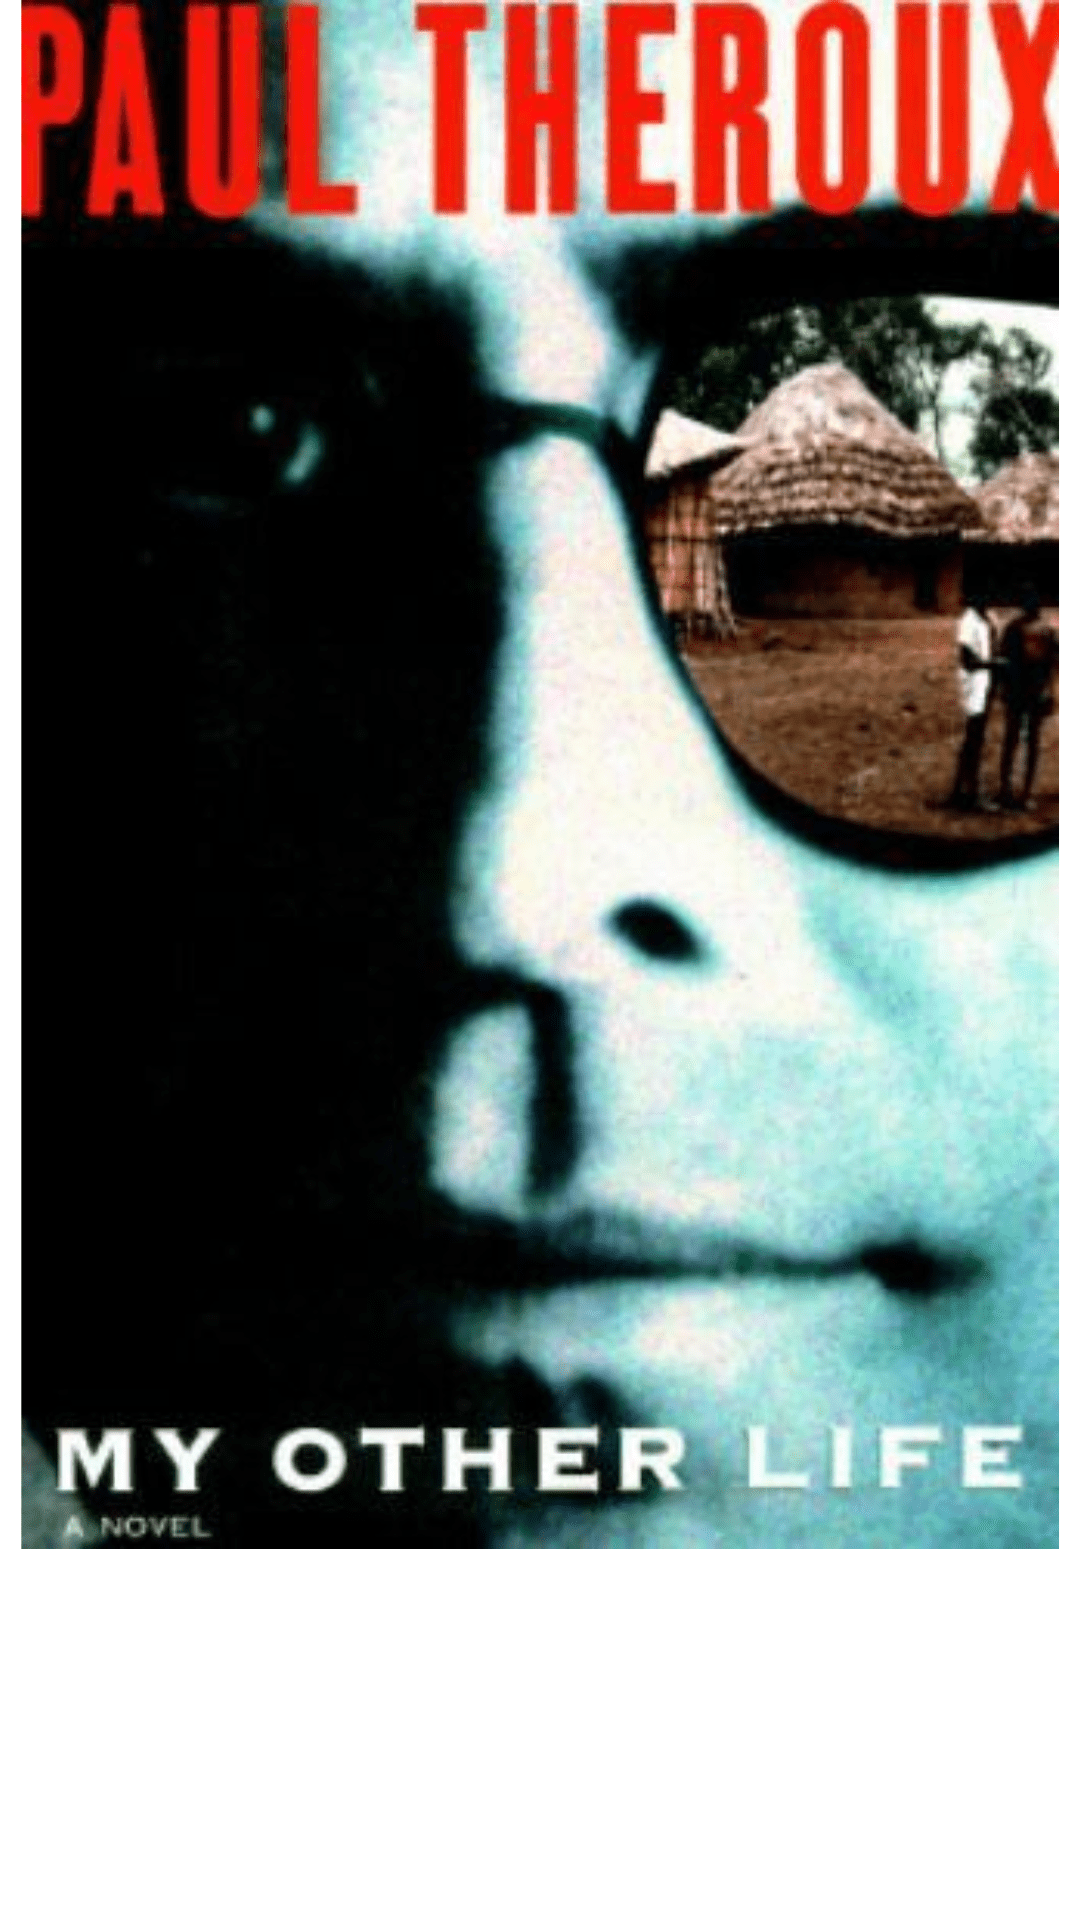 My Other Life by Paul Theroux